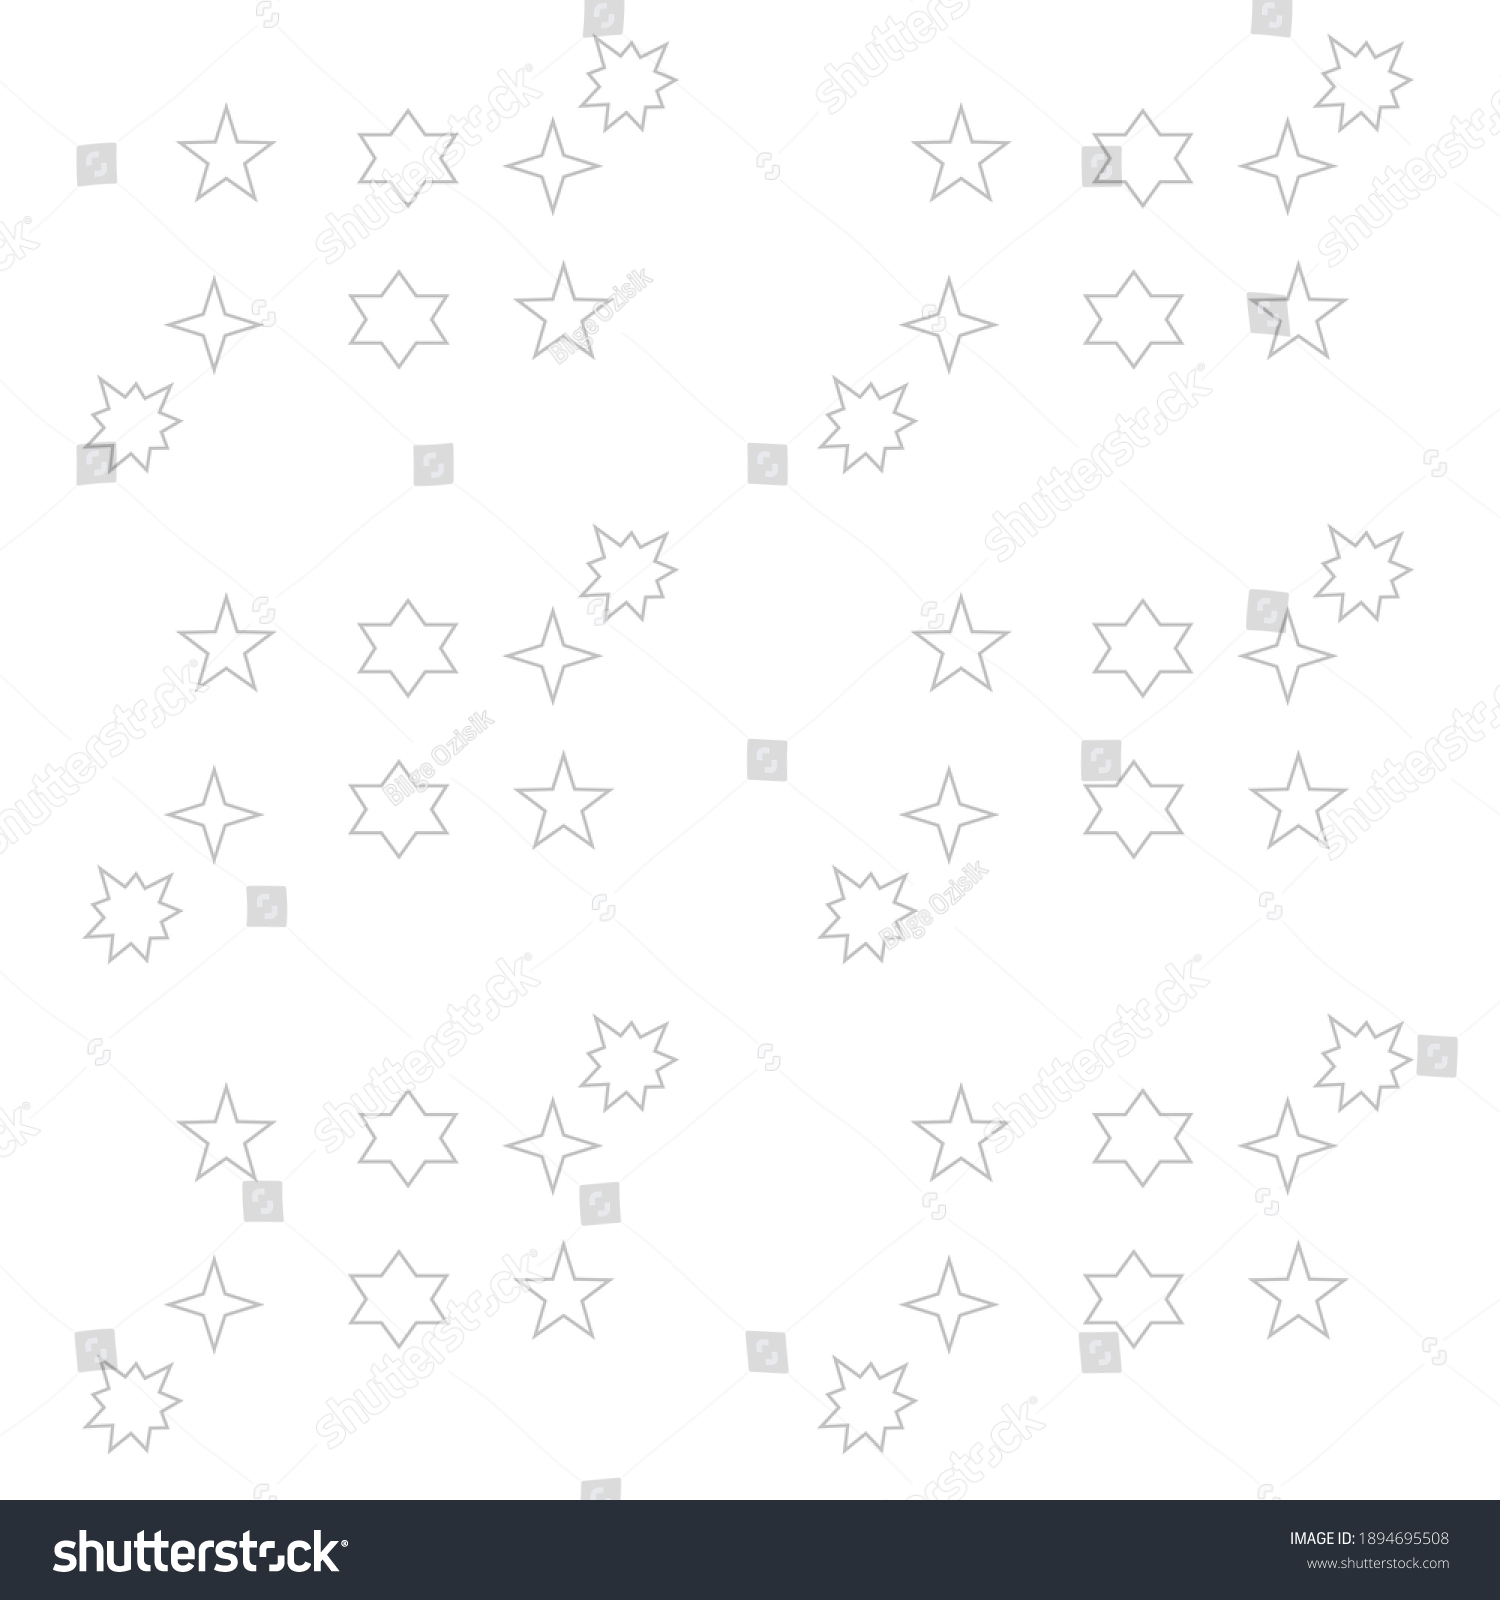 Coloring Sheet Pages Heart Stars Shapes Stock Illustration 1894695508 ...